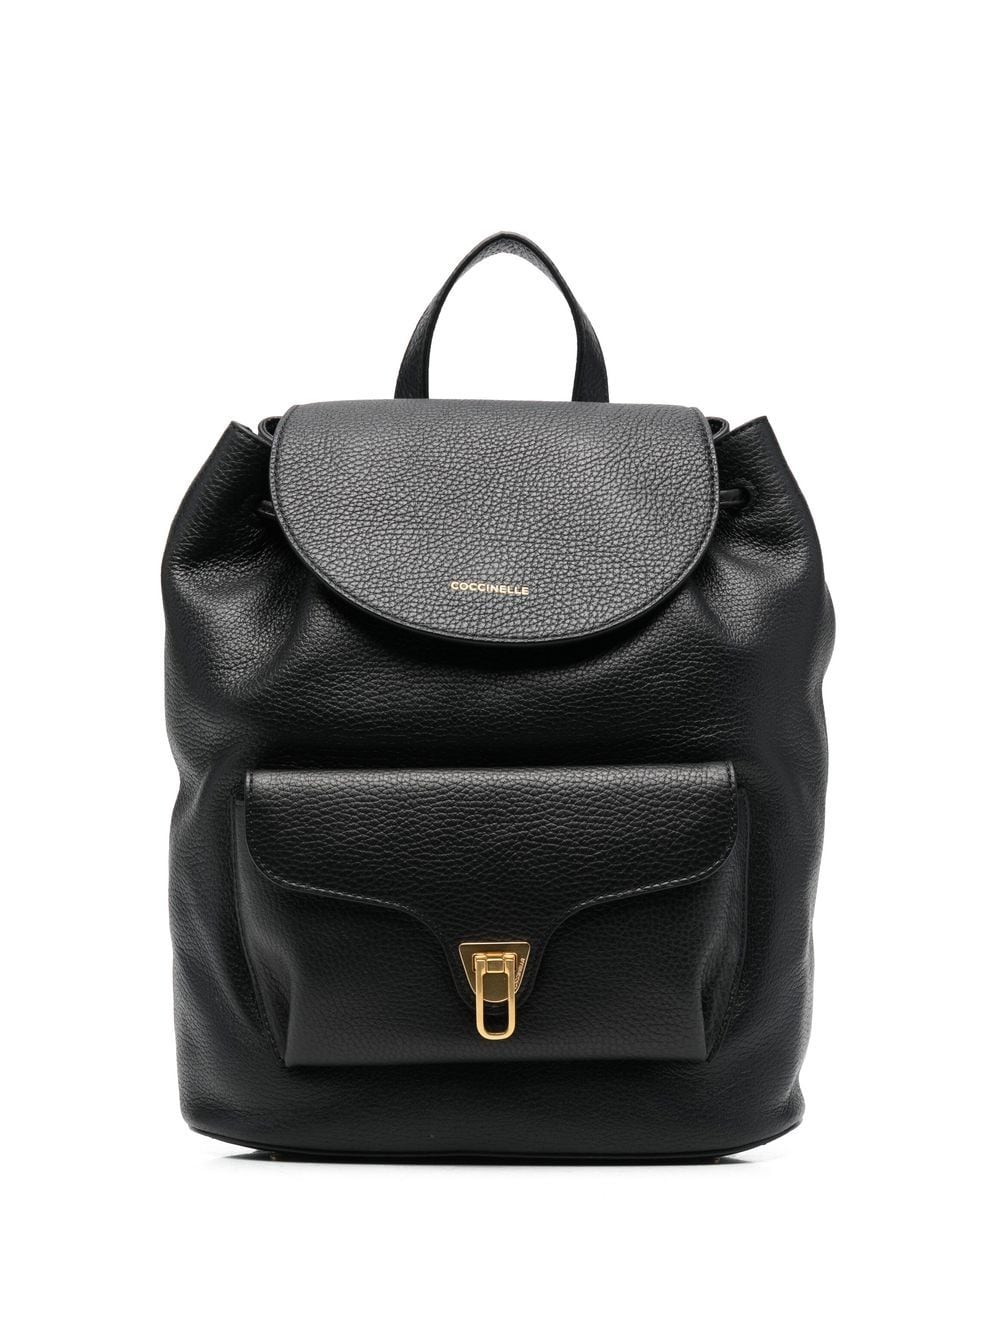 Coccinelle soft leather backpack - Black von Coccinelle